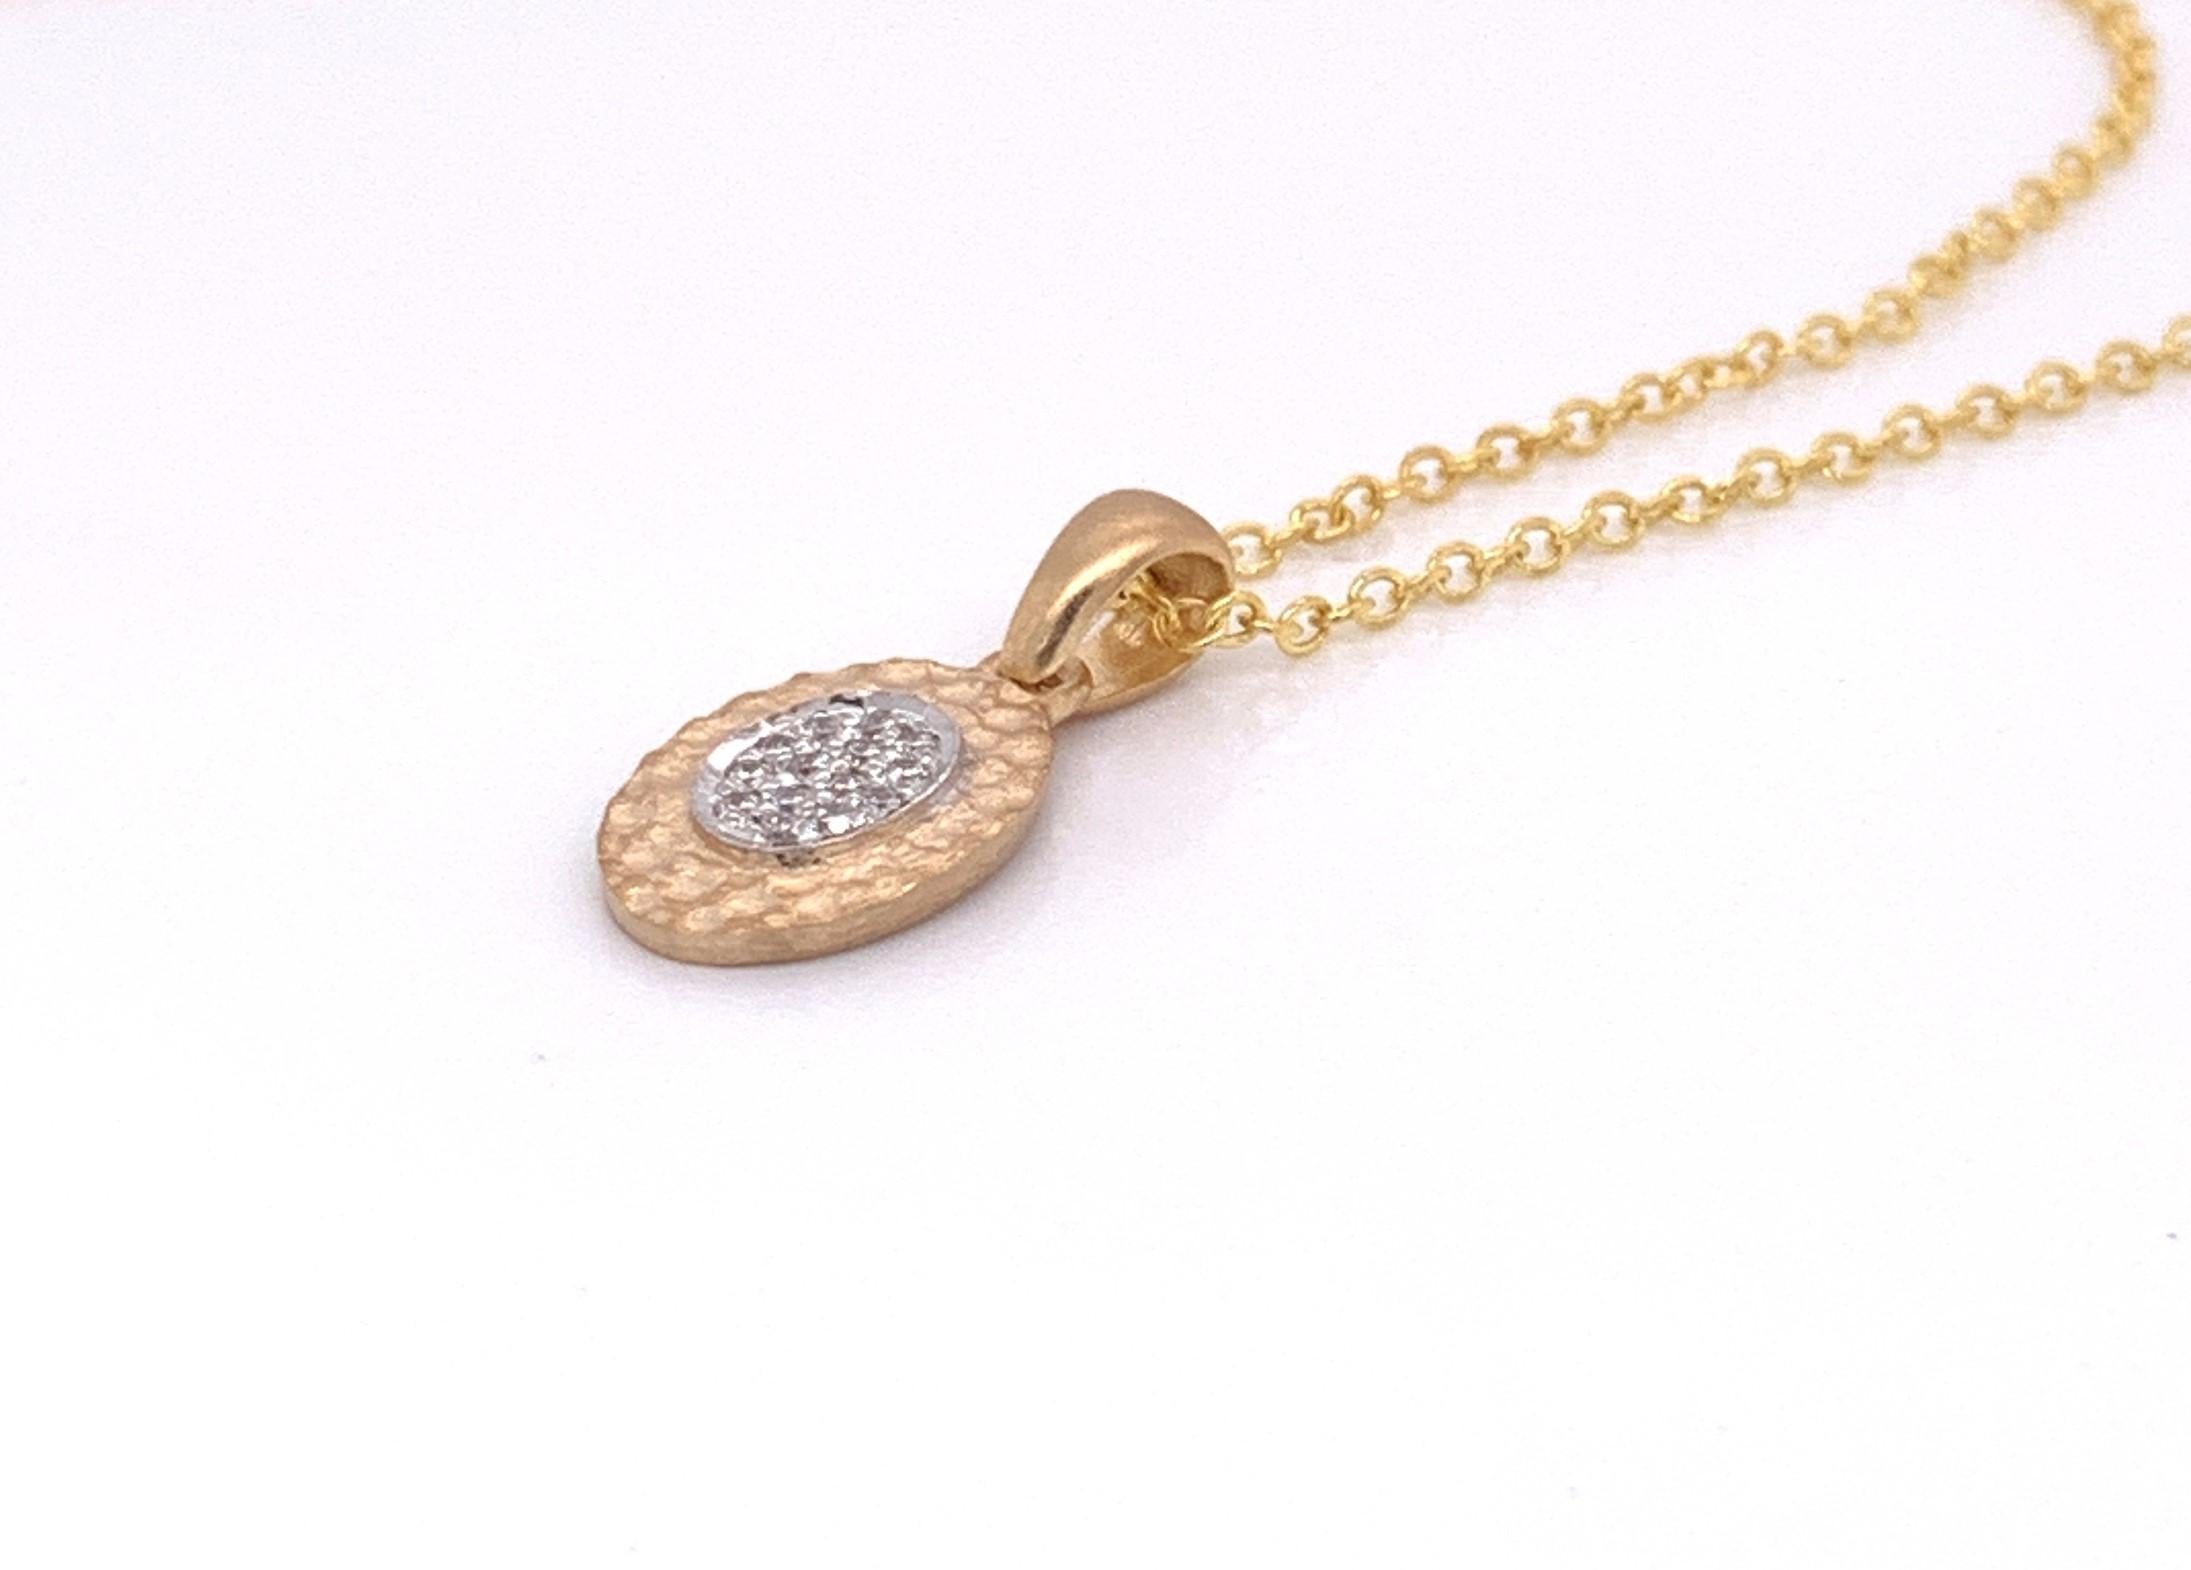 14 Karat Yellow Gold Hand-Crafted Matte and Hammer-Finished 10x8mm Oval Pendant, Centered with 0.07 Carats of Pave Set Diamonds, Sliding on a 16